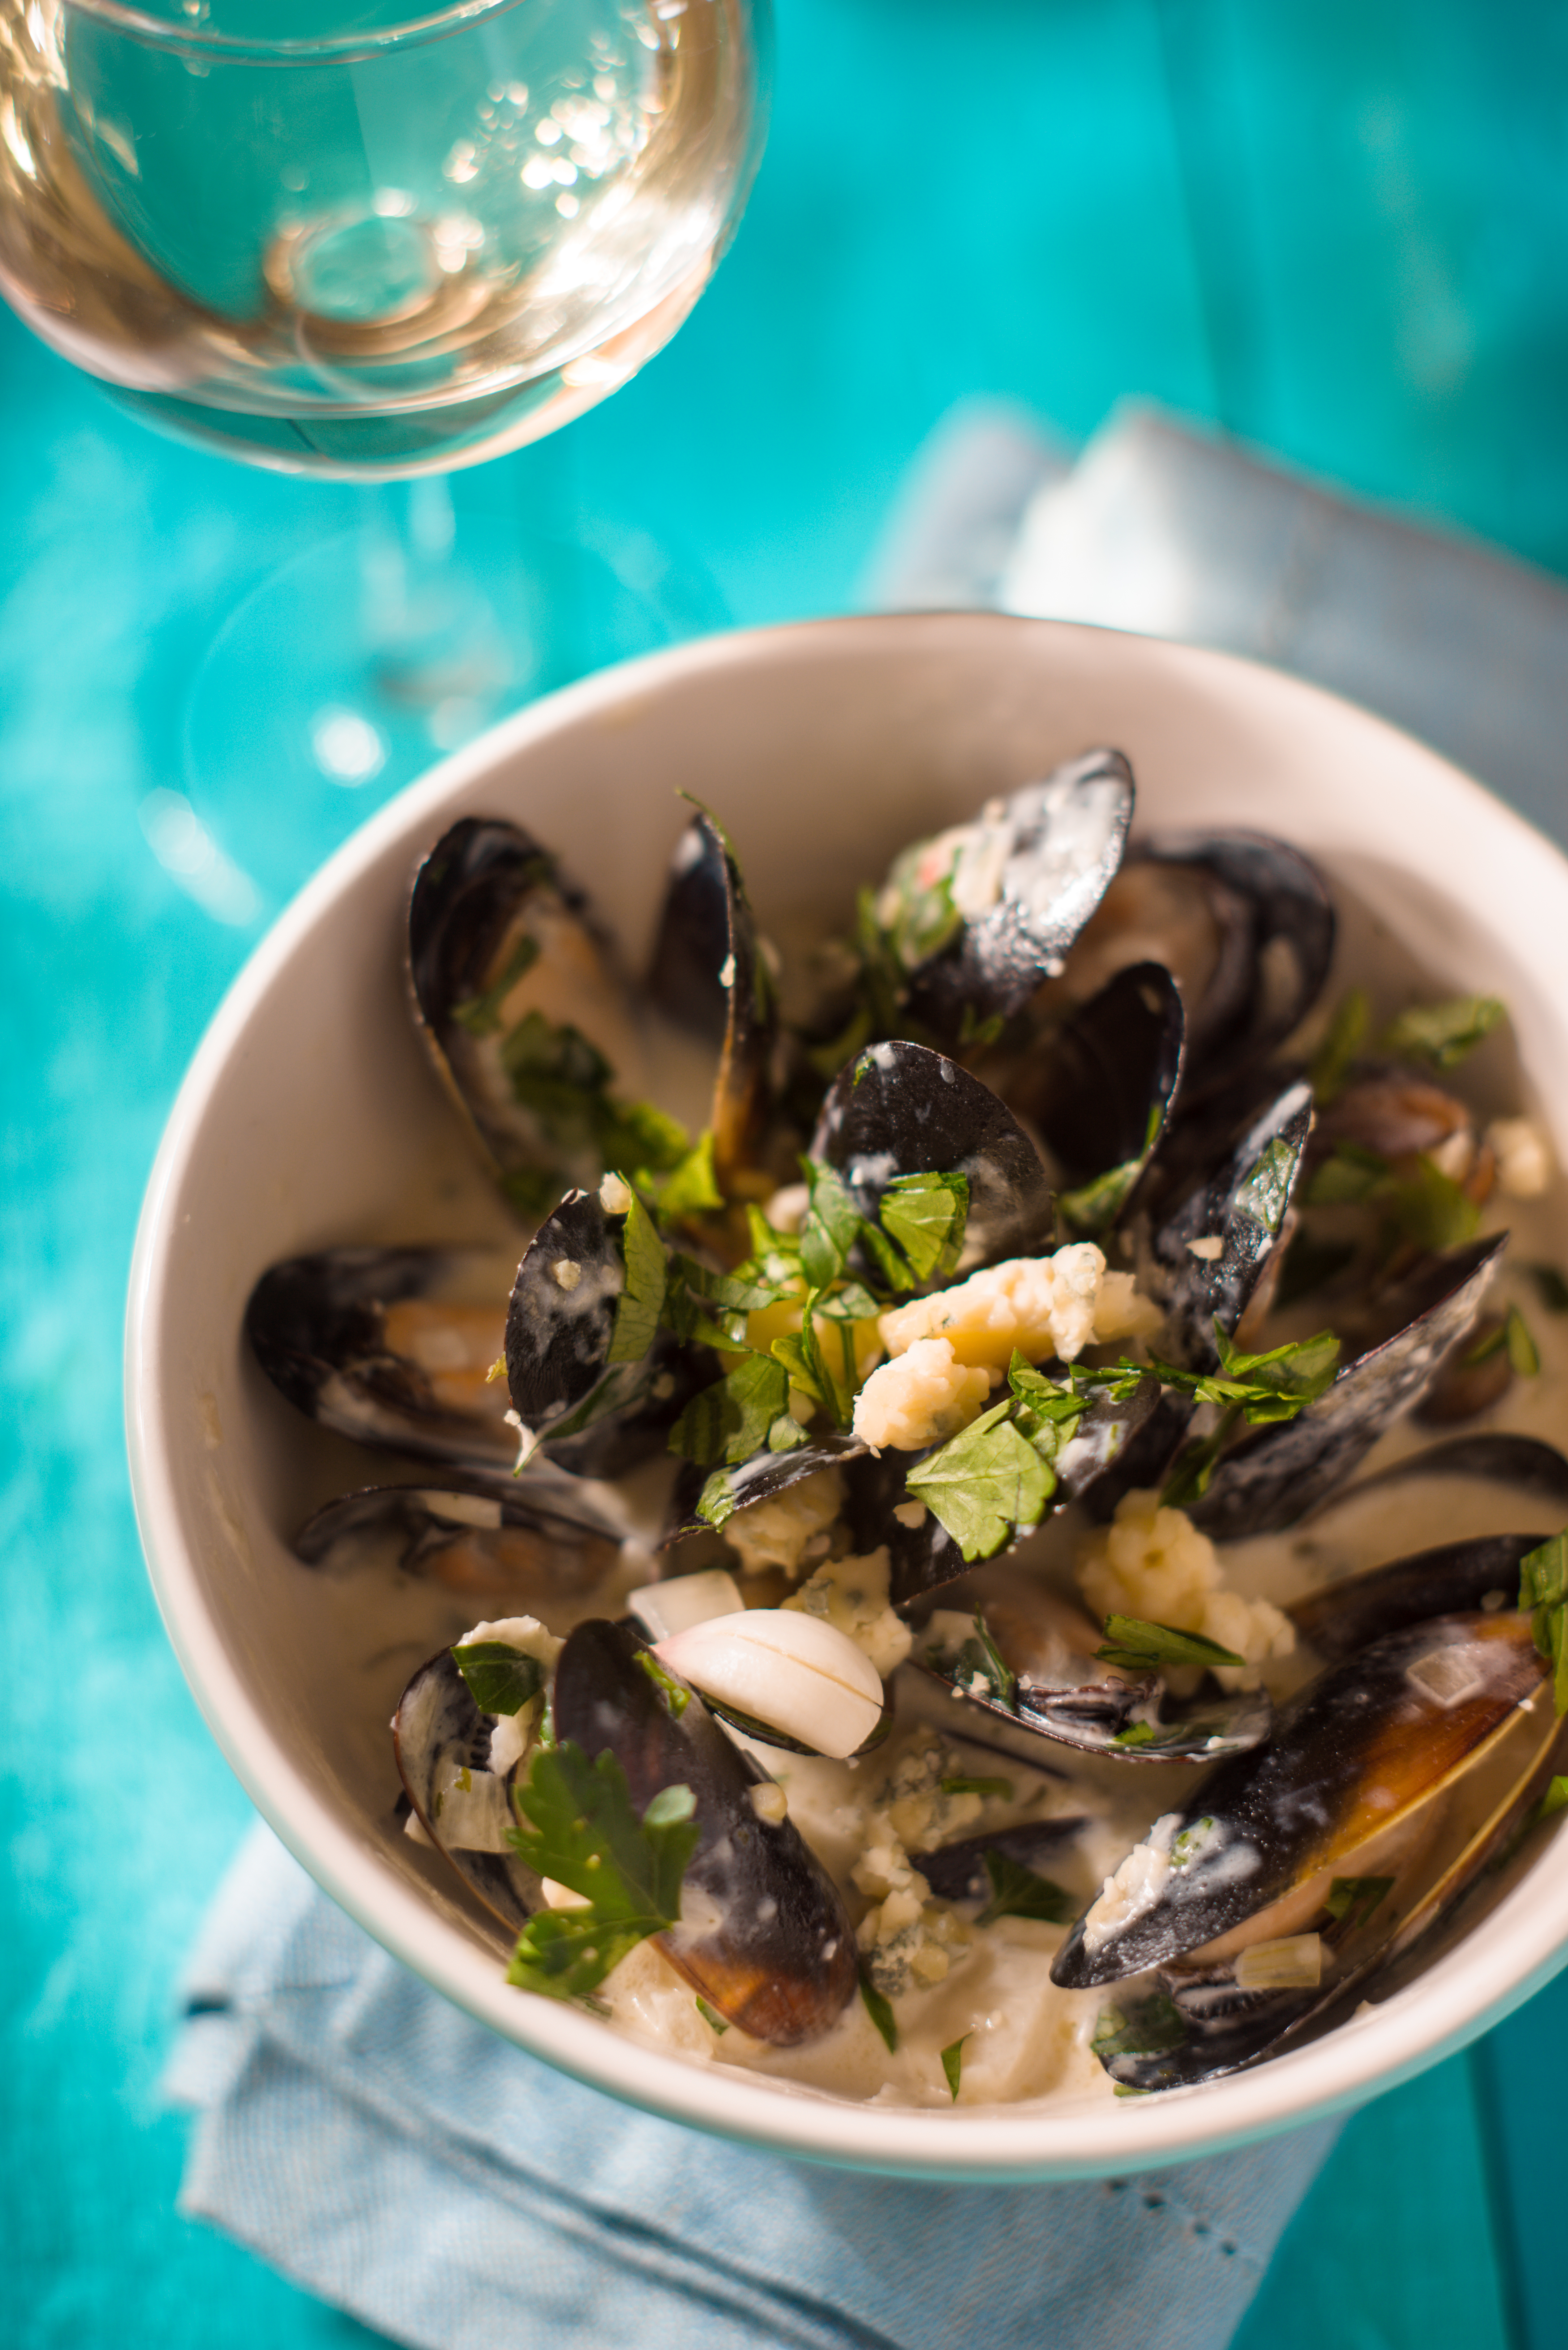 Steamed mussels in white wine, garlic, and herbs.